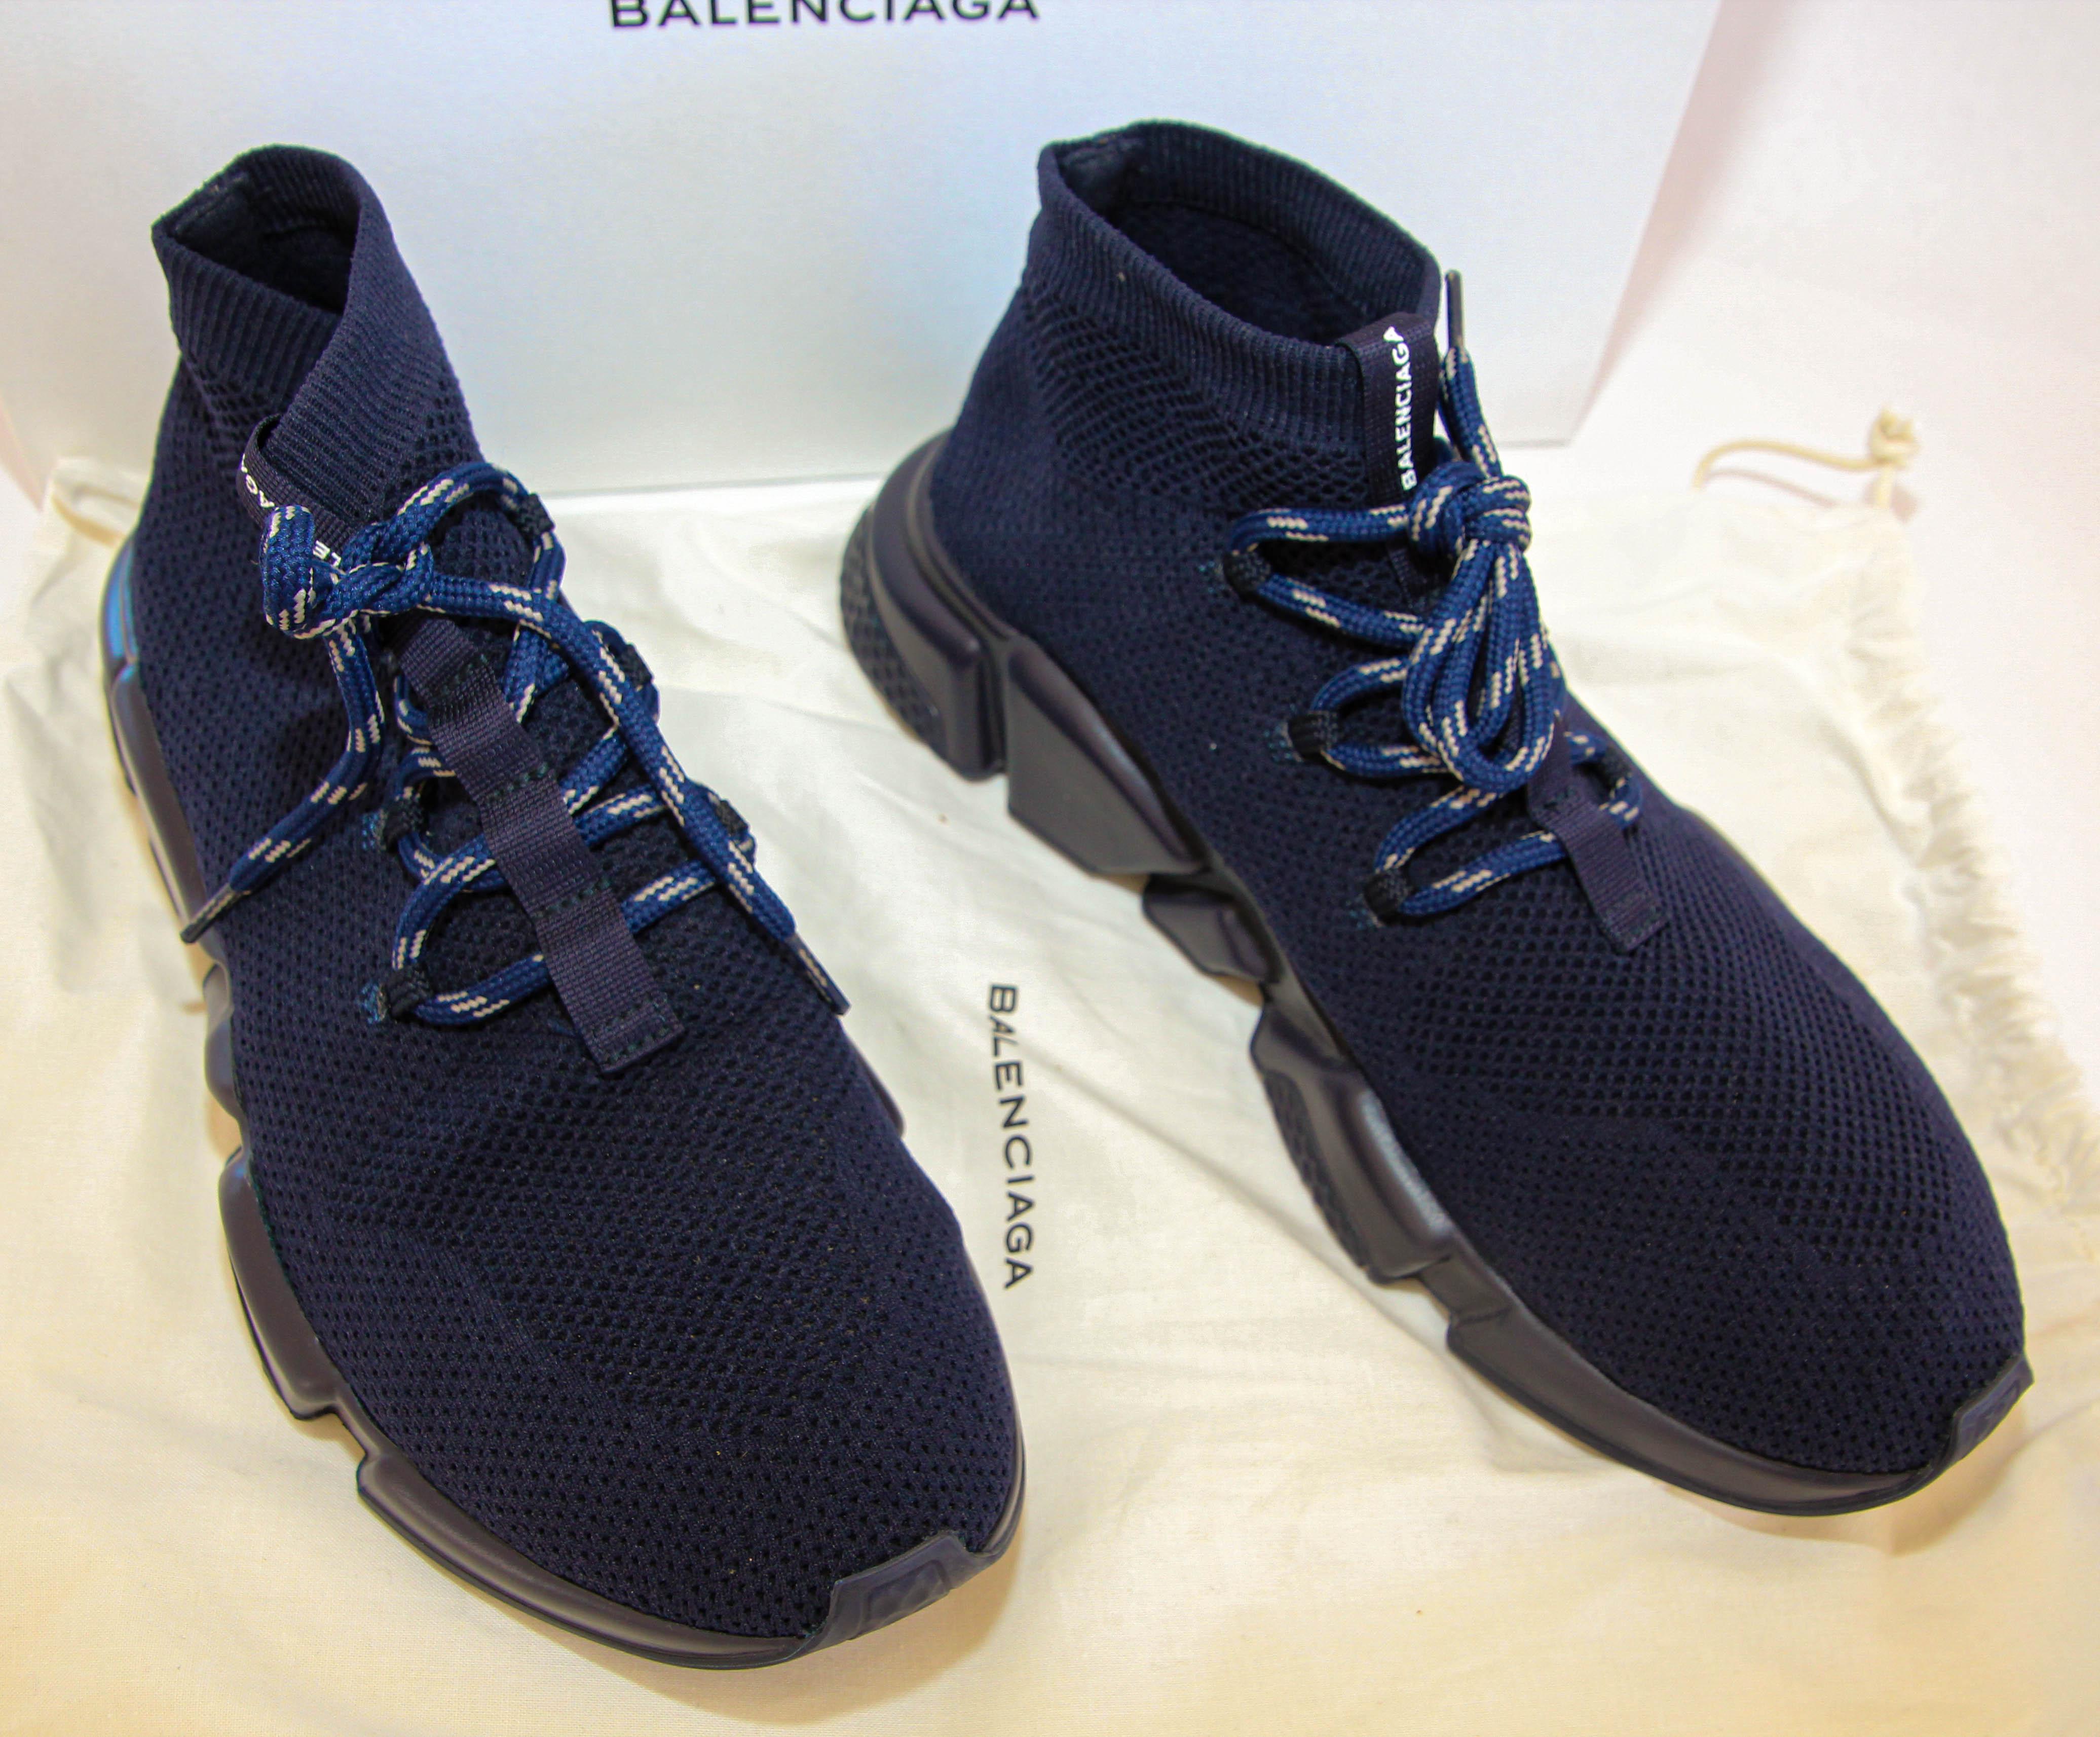 Balenciaga Men's Speed Mesh Sneakers Size 42 In Excellent Condition For Sale In North Hollywood, CA